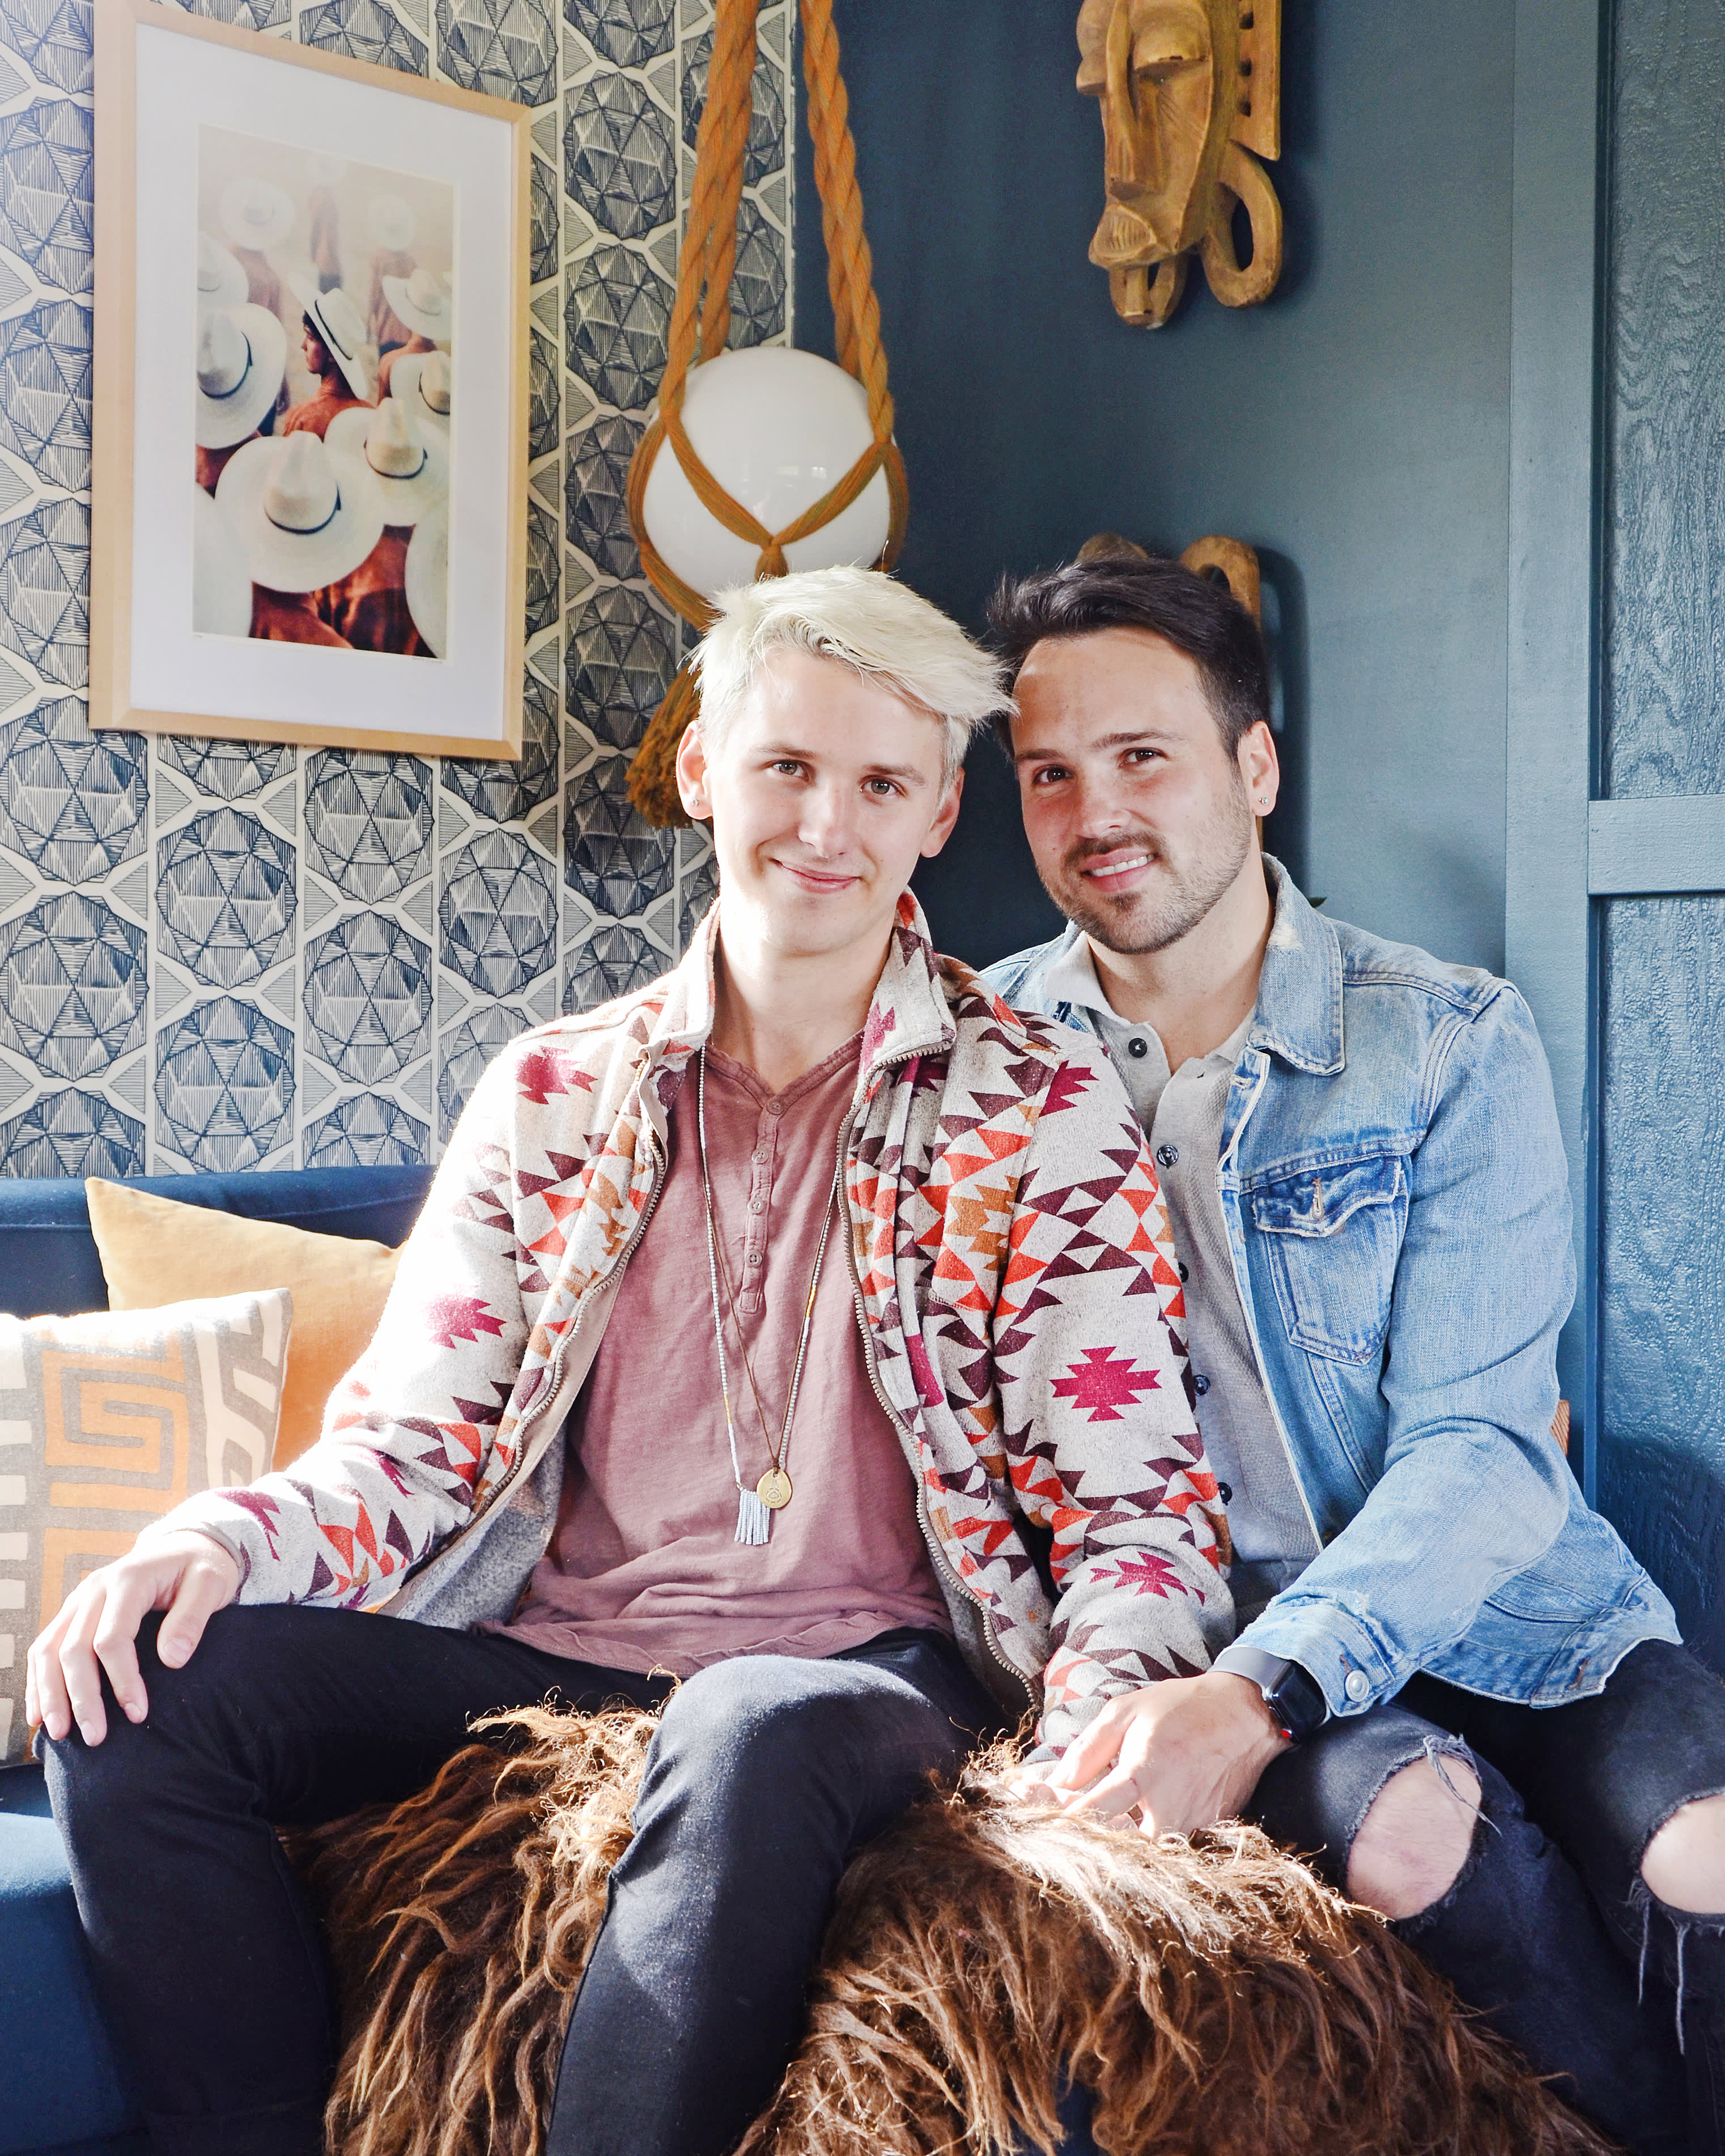 Tour The Hommeboys’ Playful, Ever-Changing Apartment | Apartment Therapy